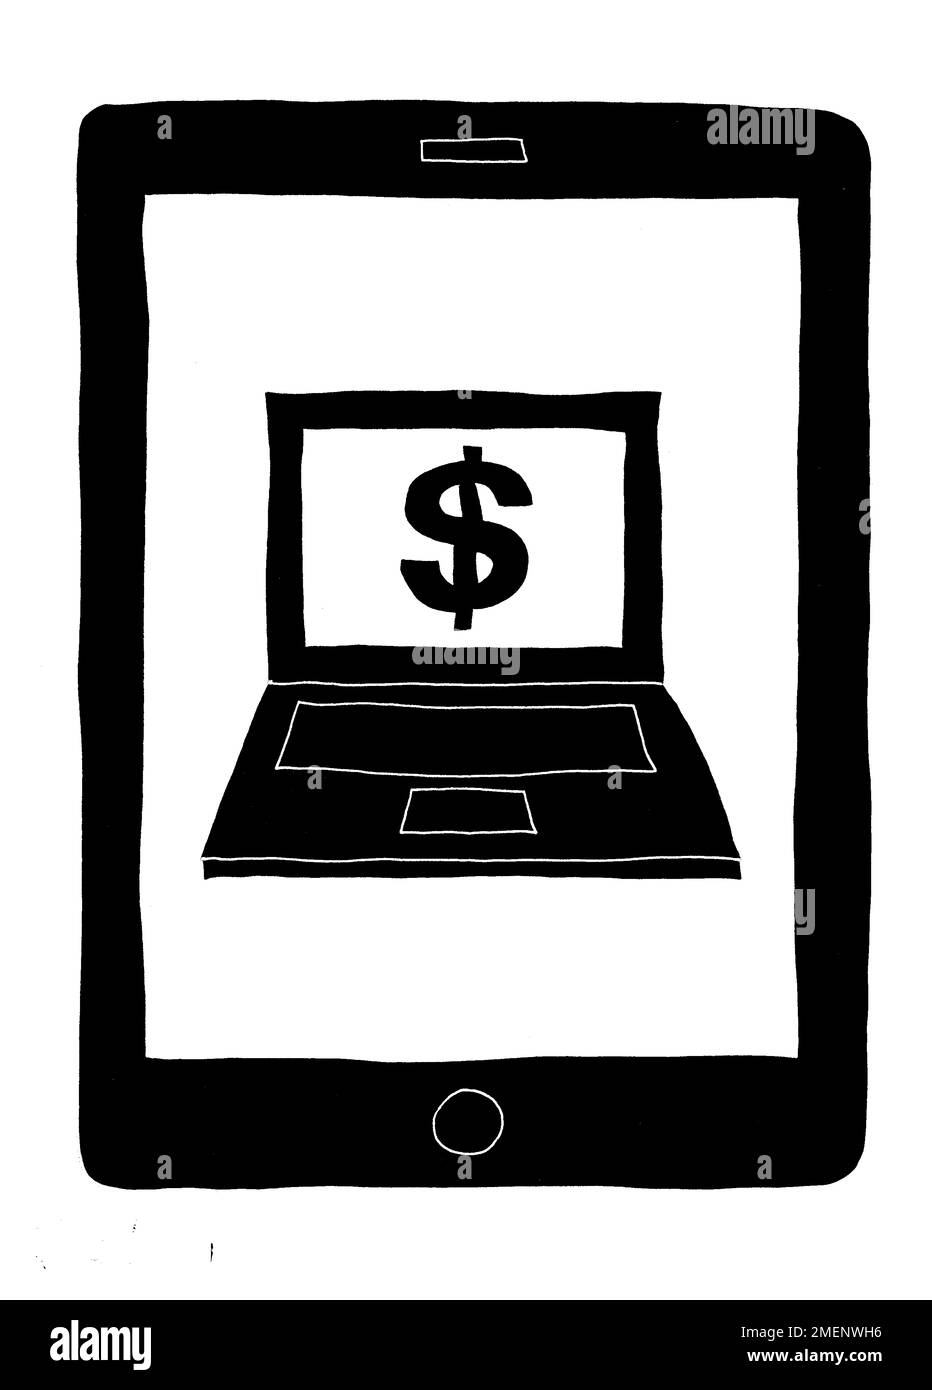 Black and white illustration of tablet device with laptop and dollar sign superimposed on screen Stock Photo